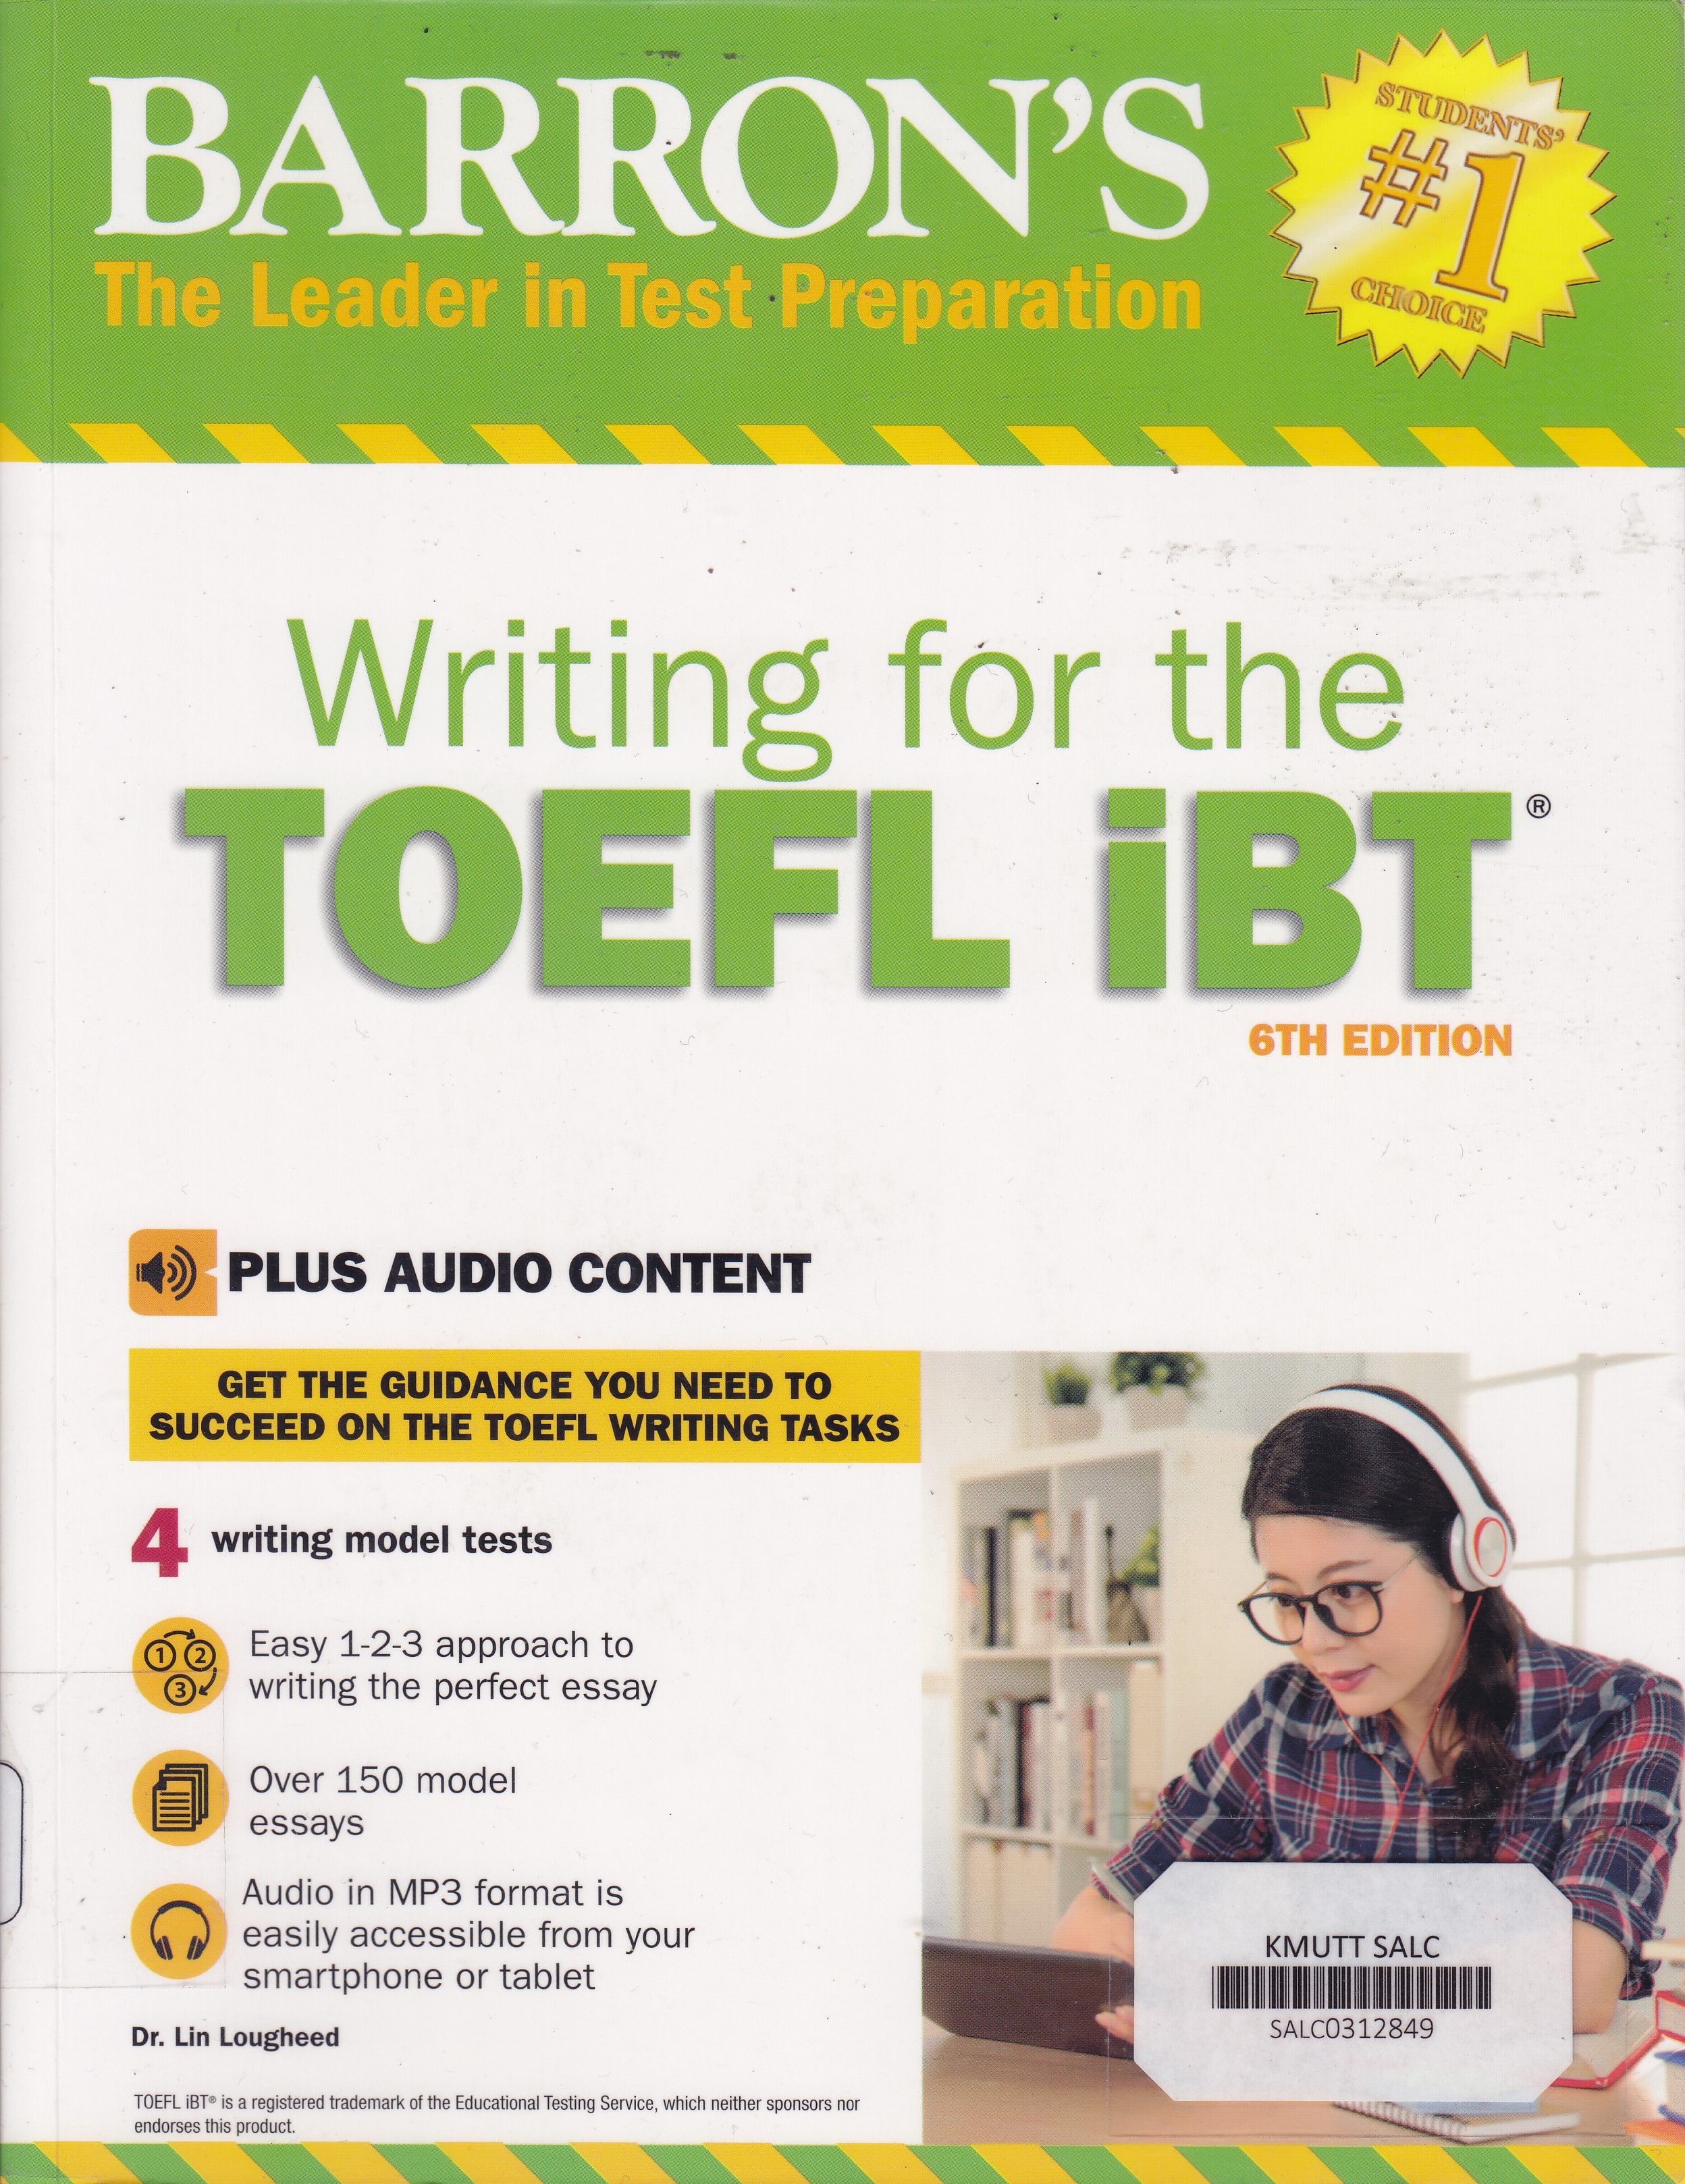 Writing for the TOEFL iBT (6th Edition)